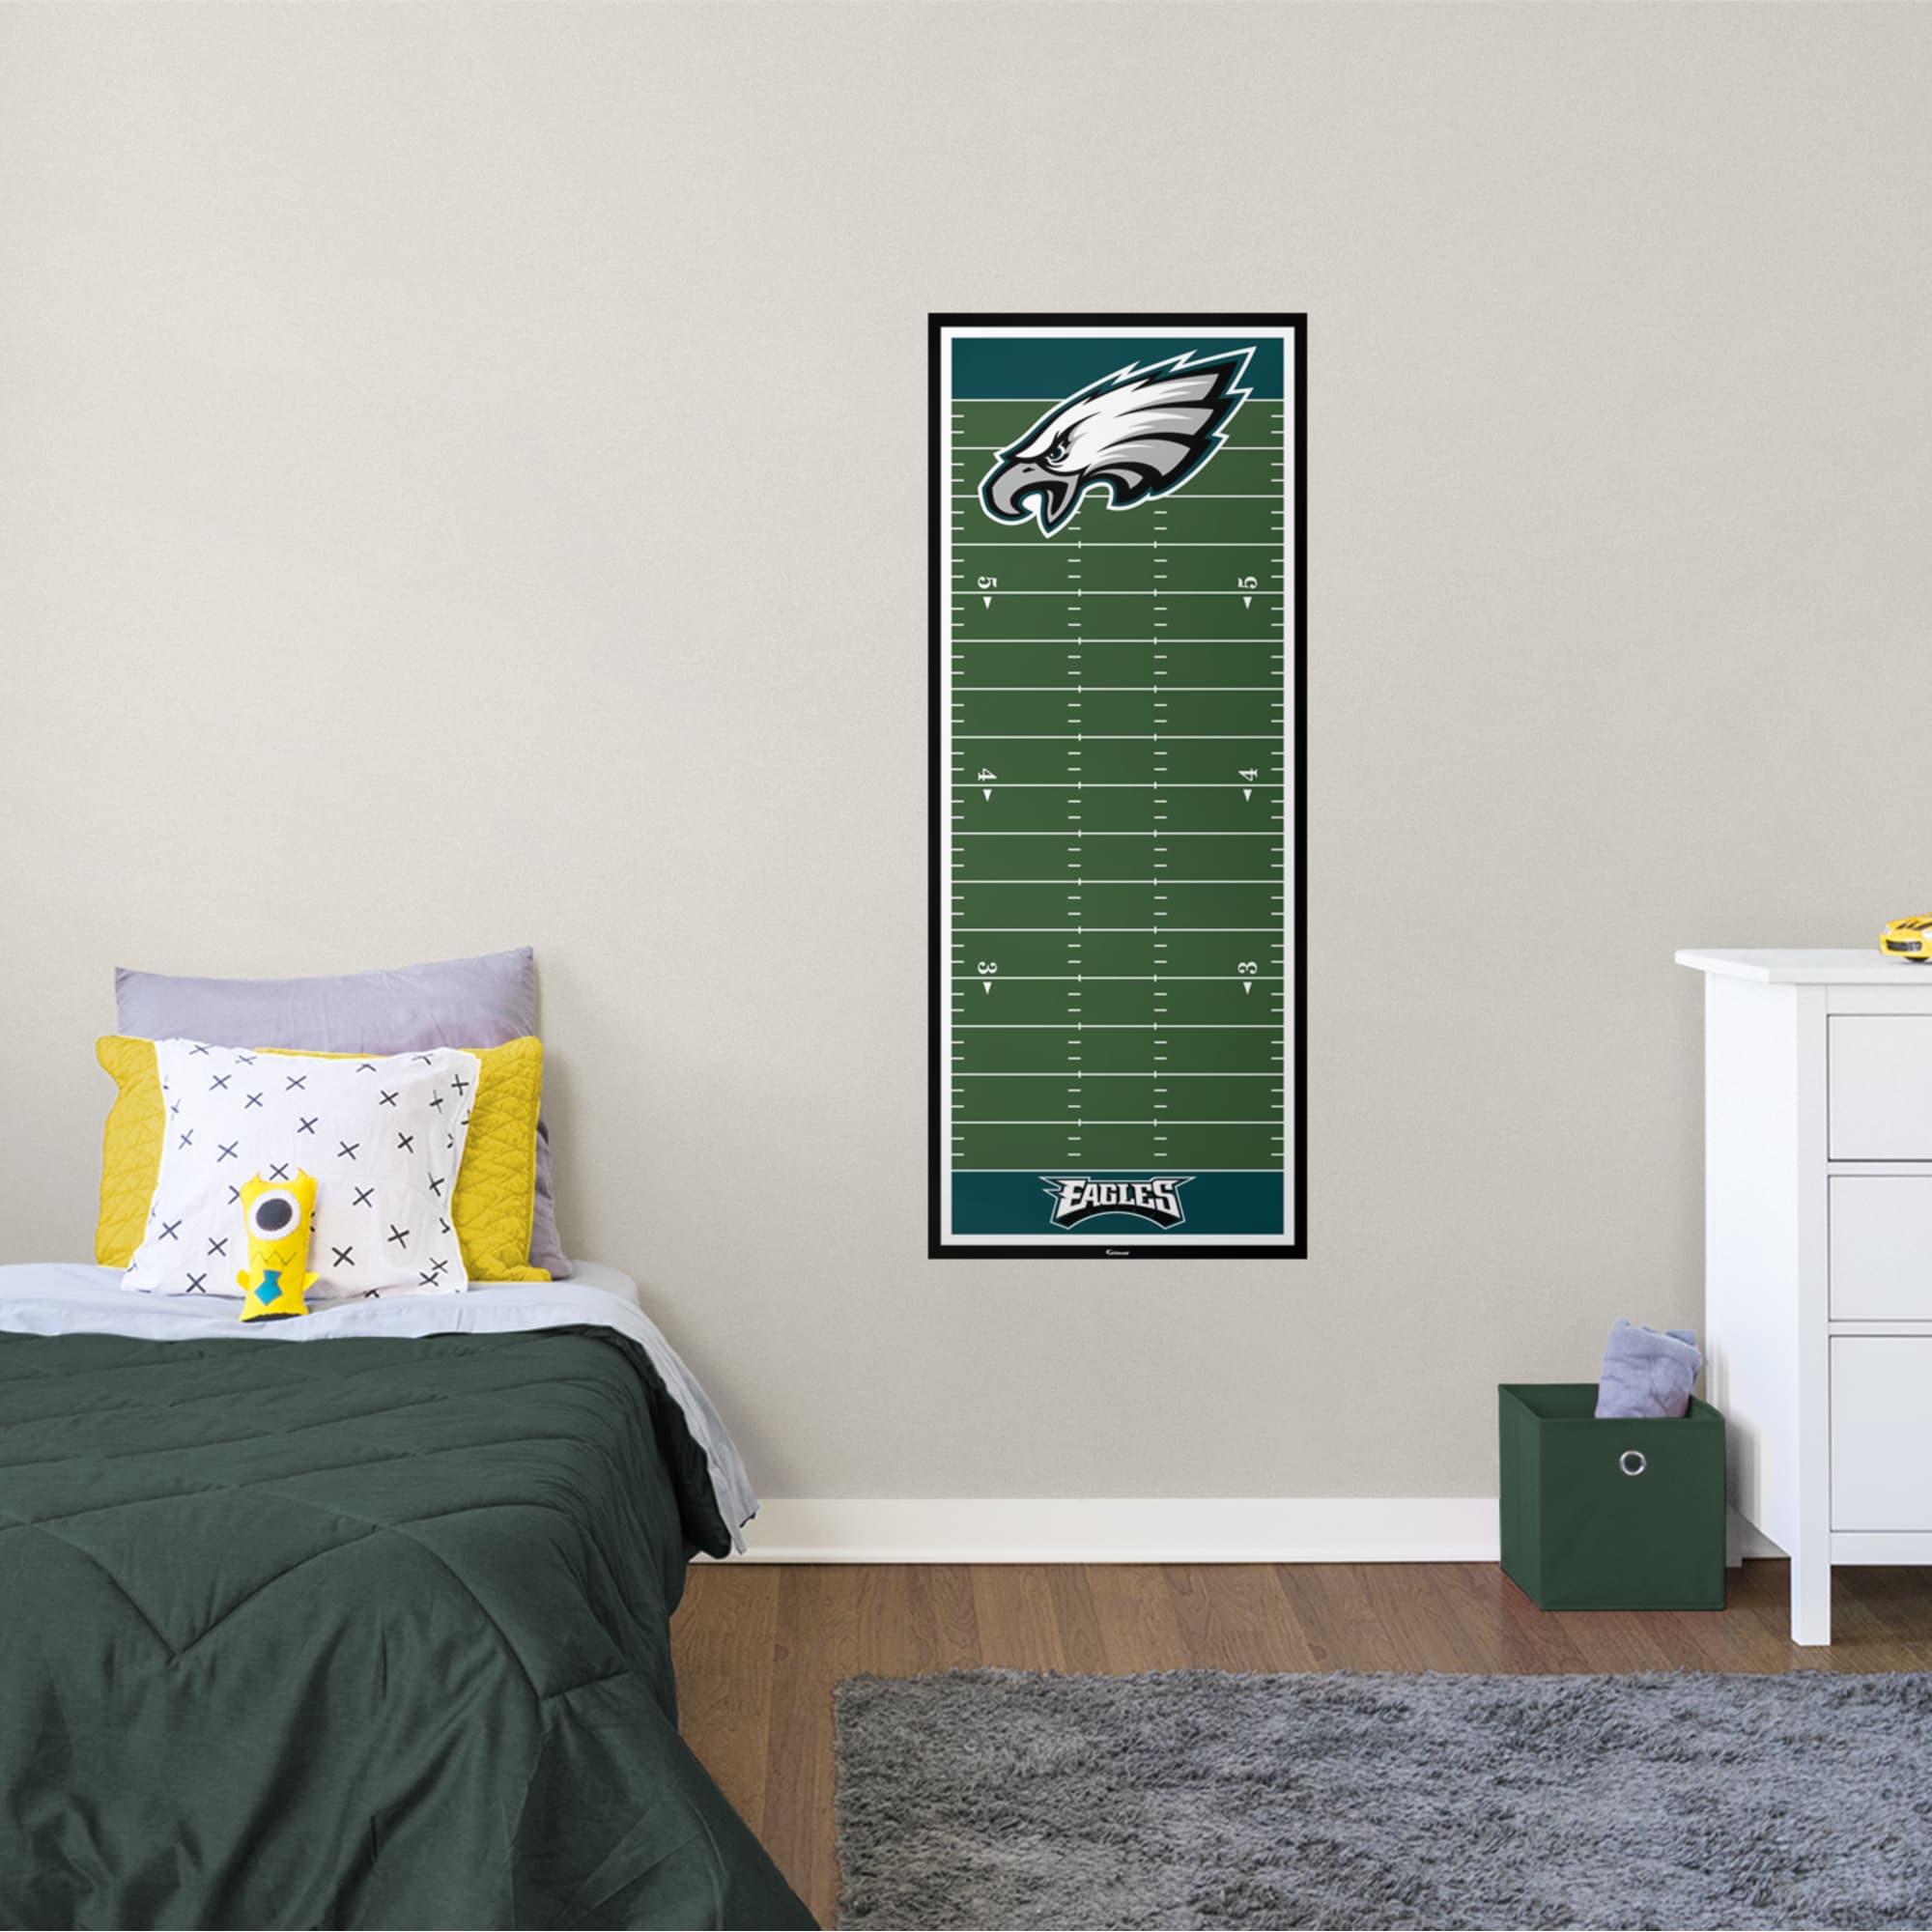 Philadelphia Eagles: Growth Chart - Officially Licensed NFL Removable Wall Graphic 24"W x 59"H by Fathead | Vinyl